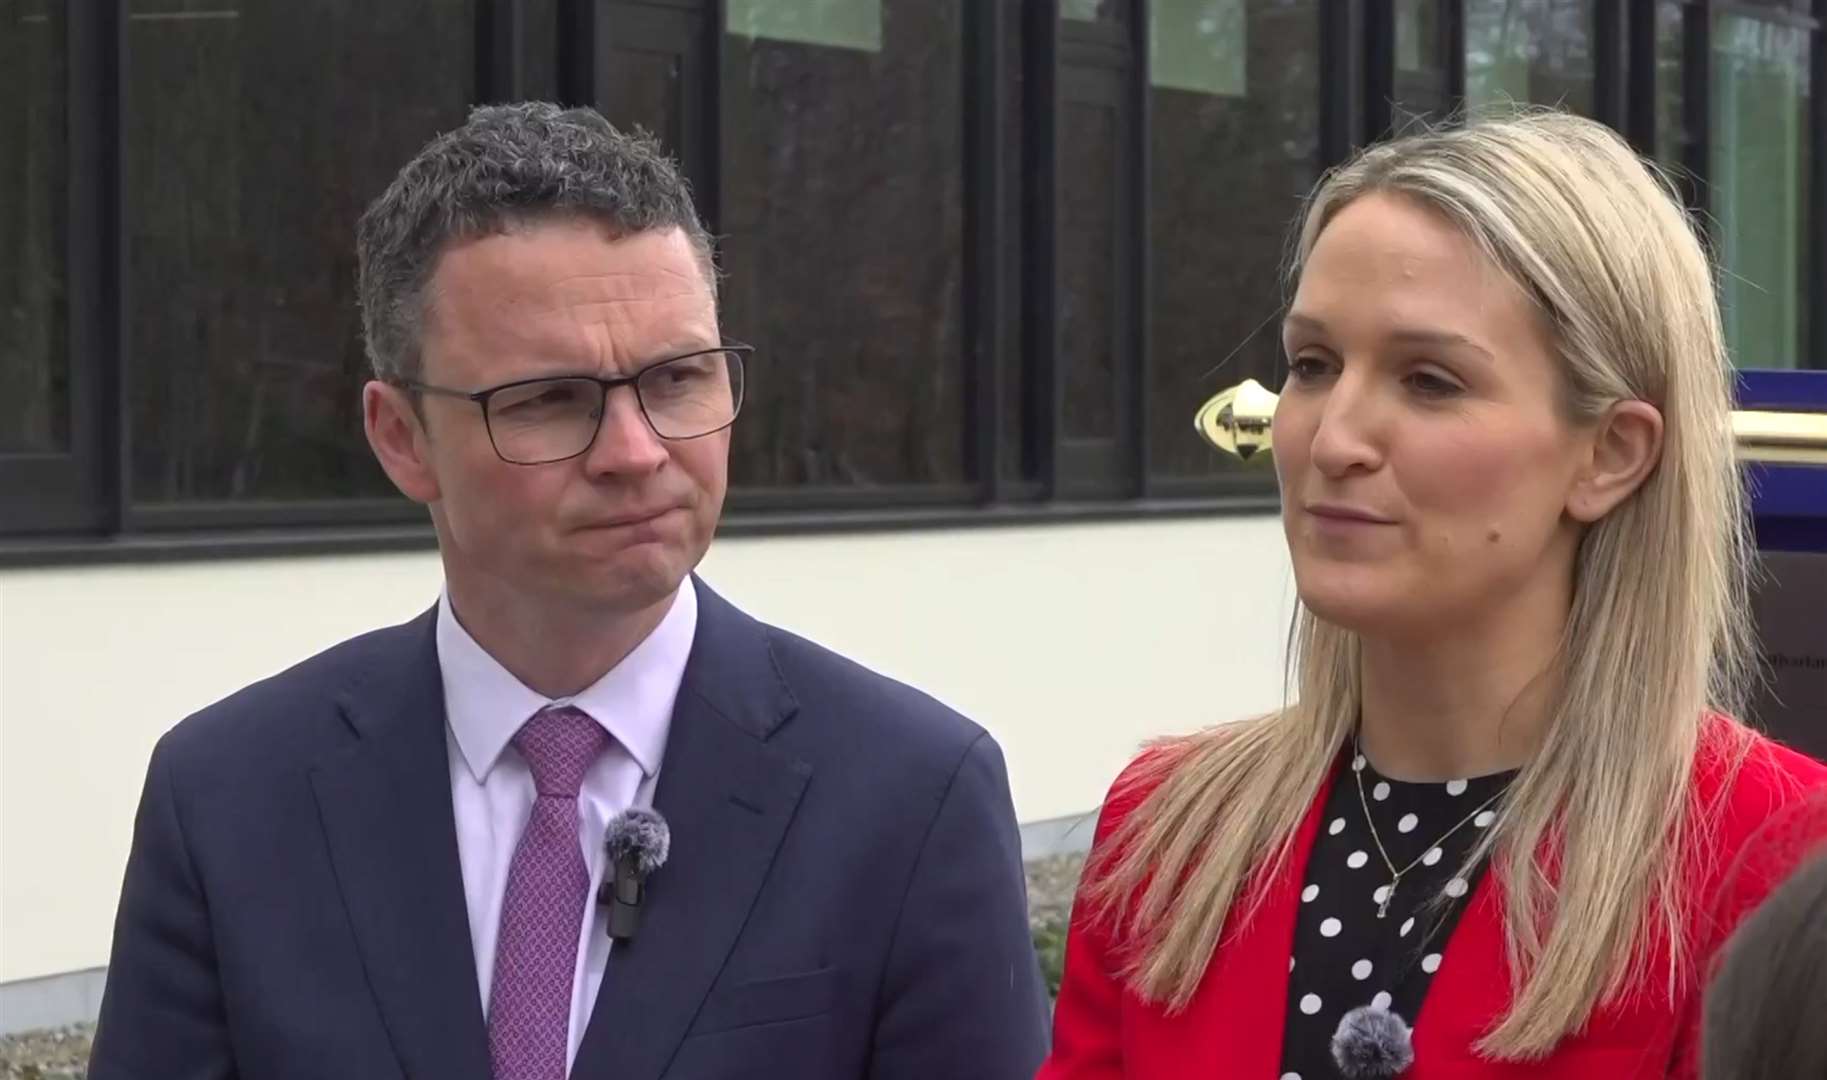 Minister of State Patrick O’Donovan and Minister for Justice Helen McEntee at the Backweston Laboratory Campus in Co Kildare talking to the media about the Fine Gael leadership contest as McEntee rules herself out (PA video)